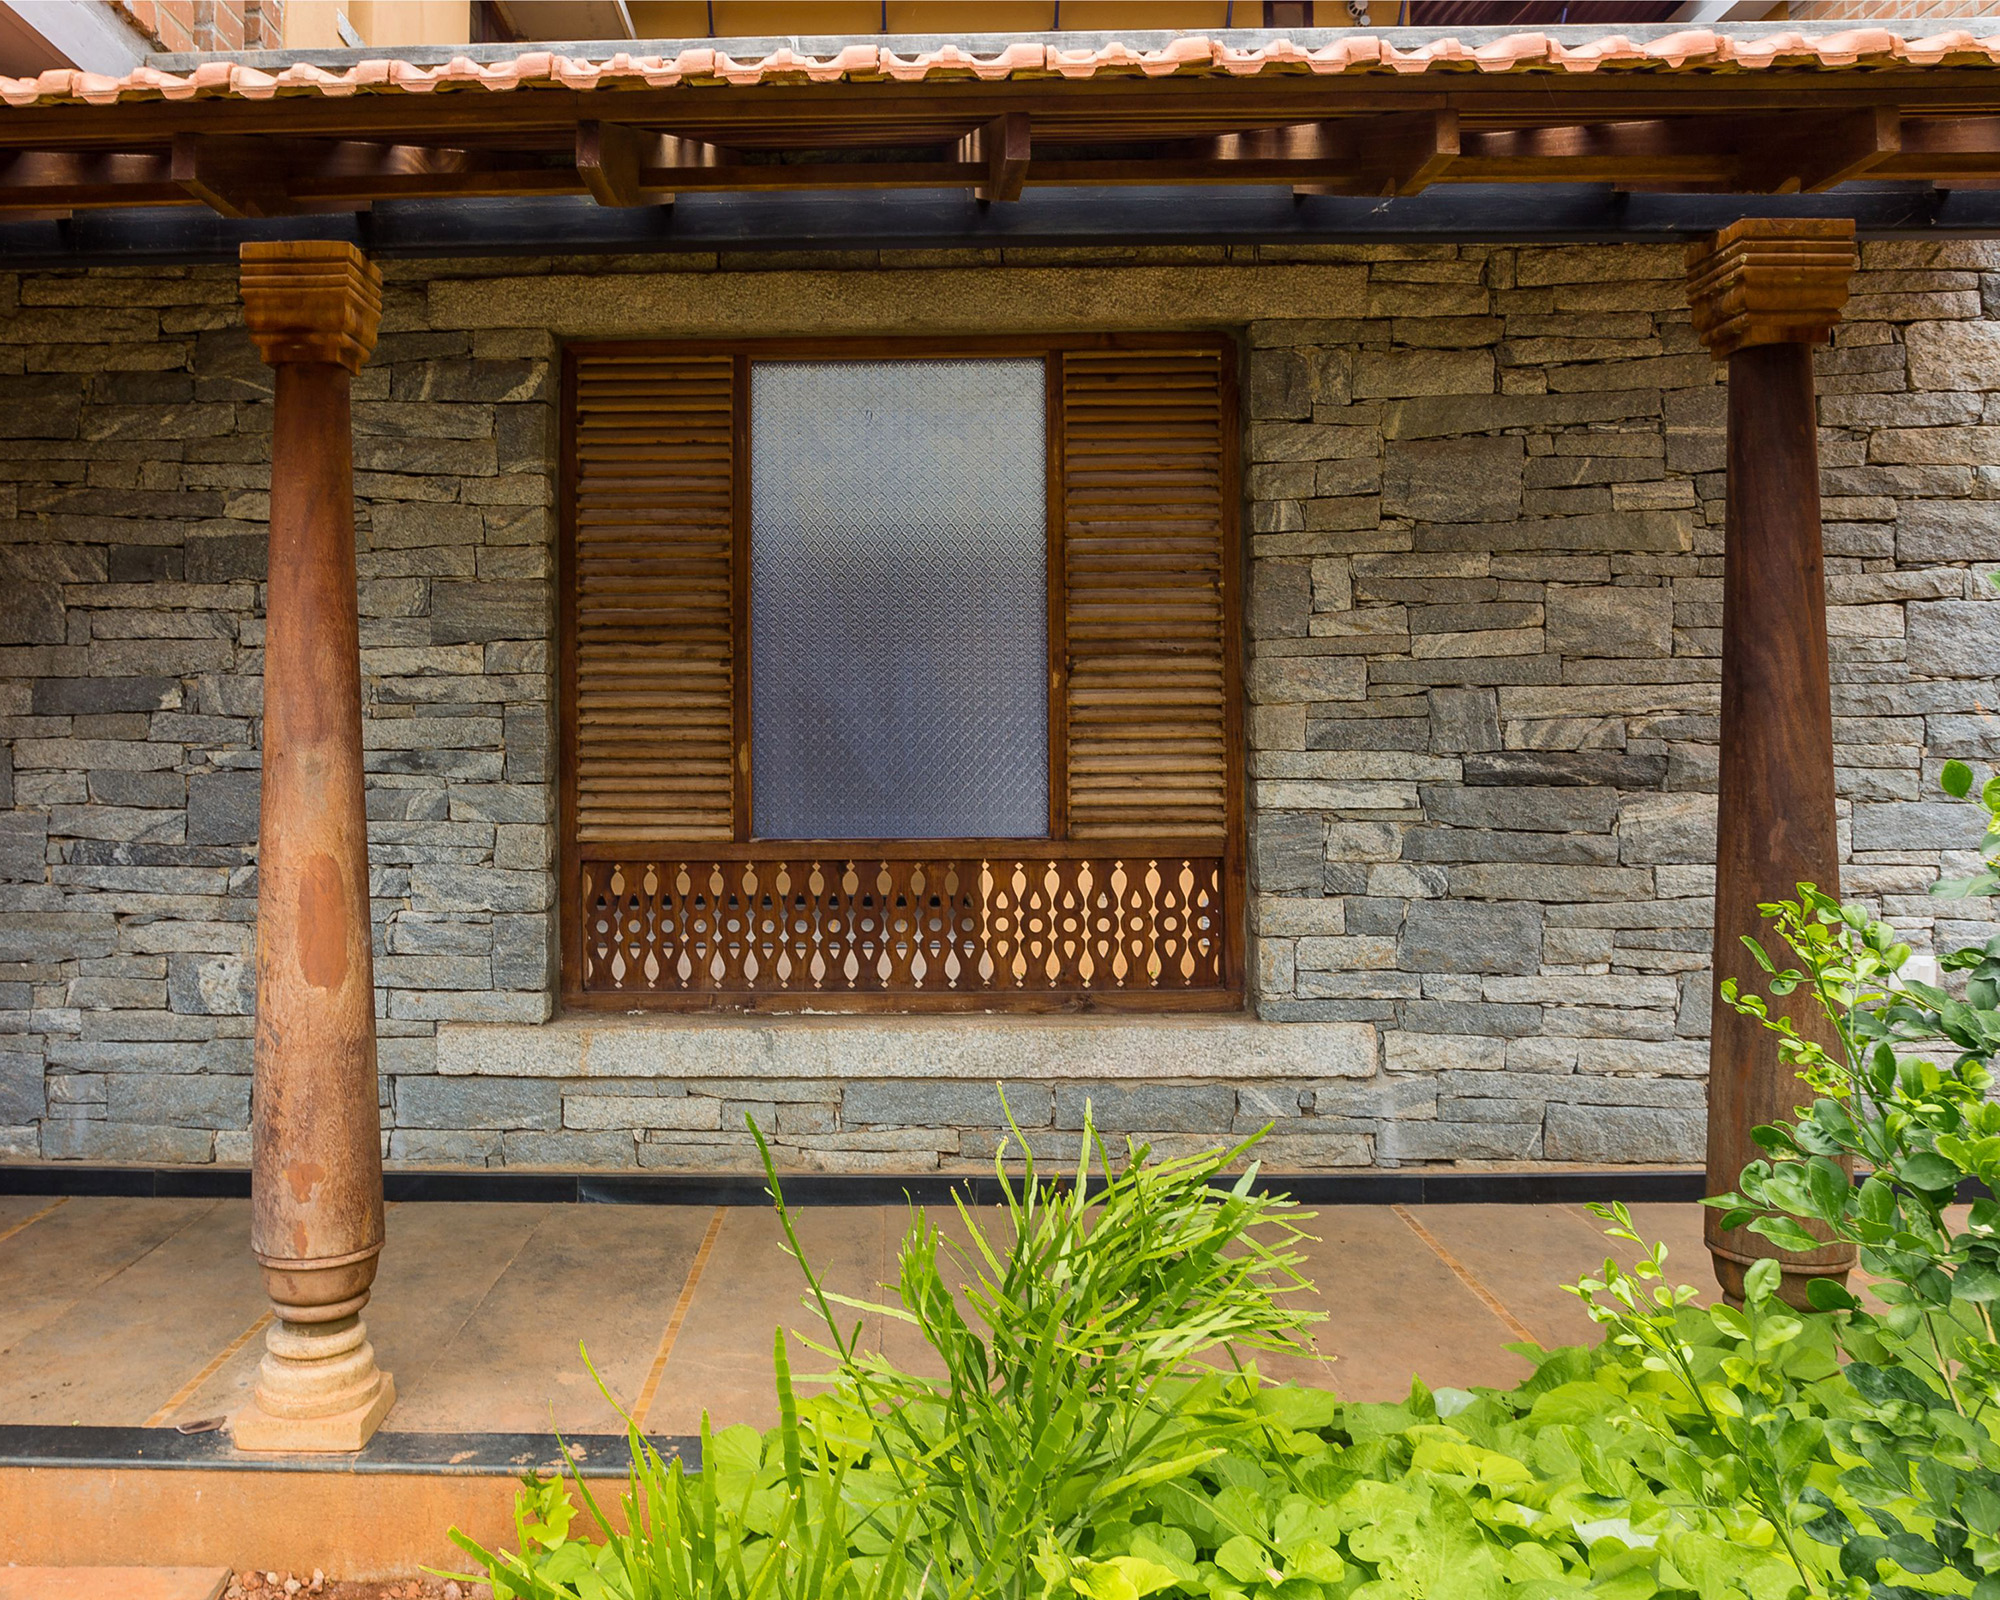 Wooden pillars and jaali at the entrance of a house at Good Earth Malhar